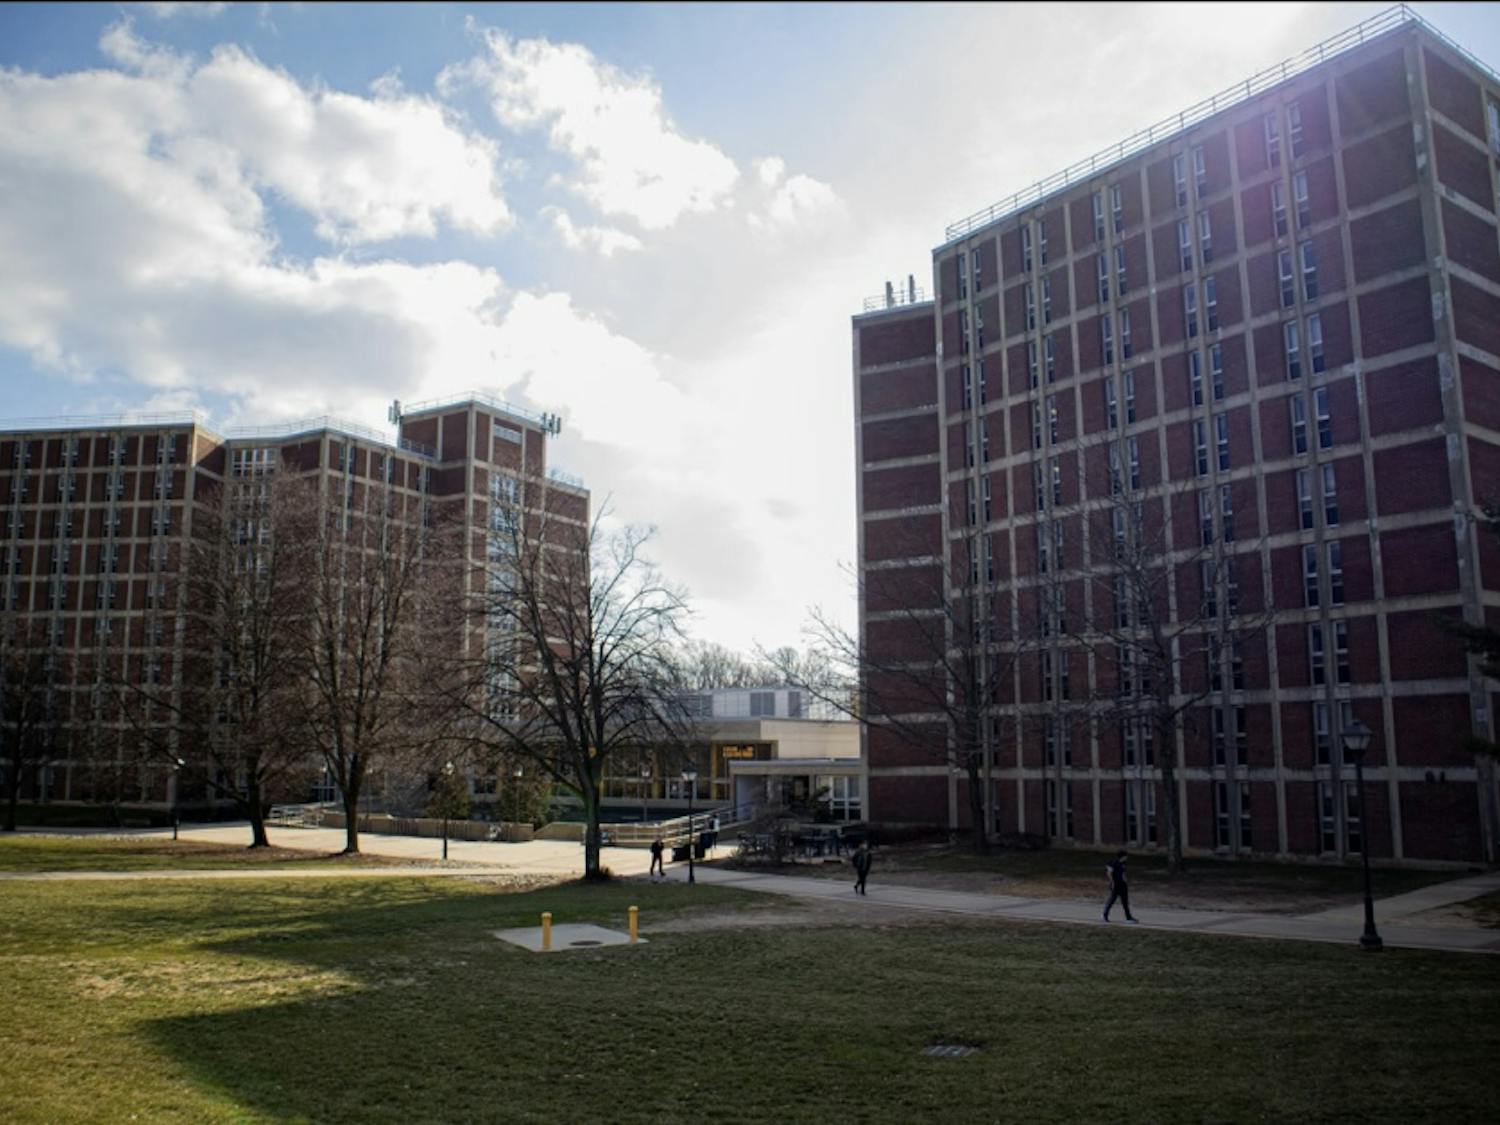 Students have been confused by the College’s plans for new housing following the President’s email last Spring that the Towers would close. (Photo courtesy Shane Gillespie / Staff Photographer)